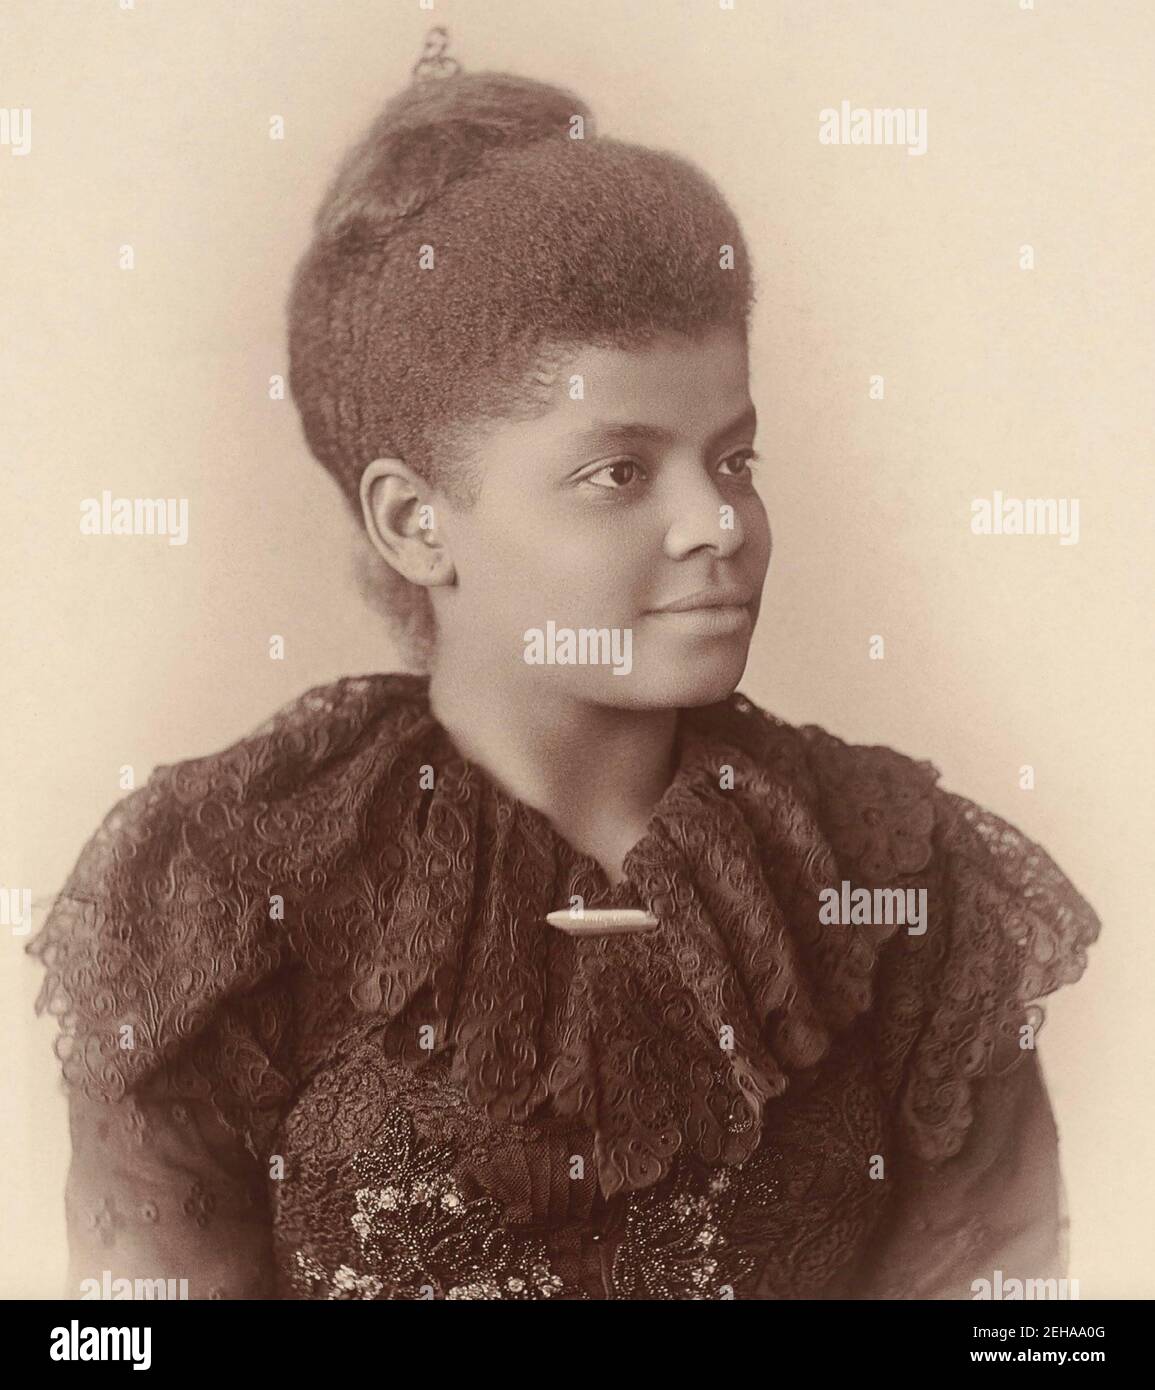 IDA B. WELLS (1862-1931) American investigative journalist, educator and one of the founders of the NAACP. About 1893. Stock Photo